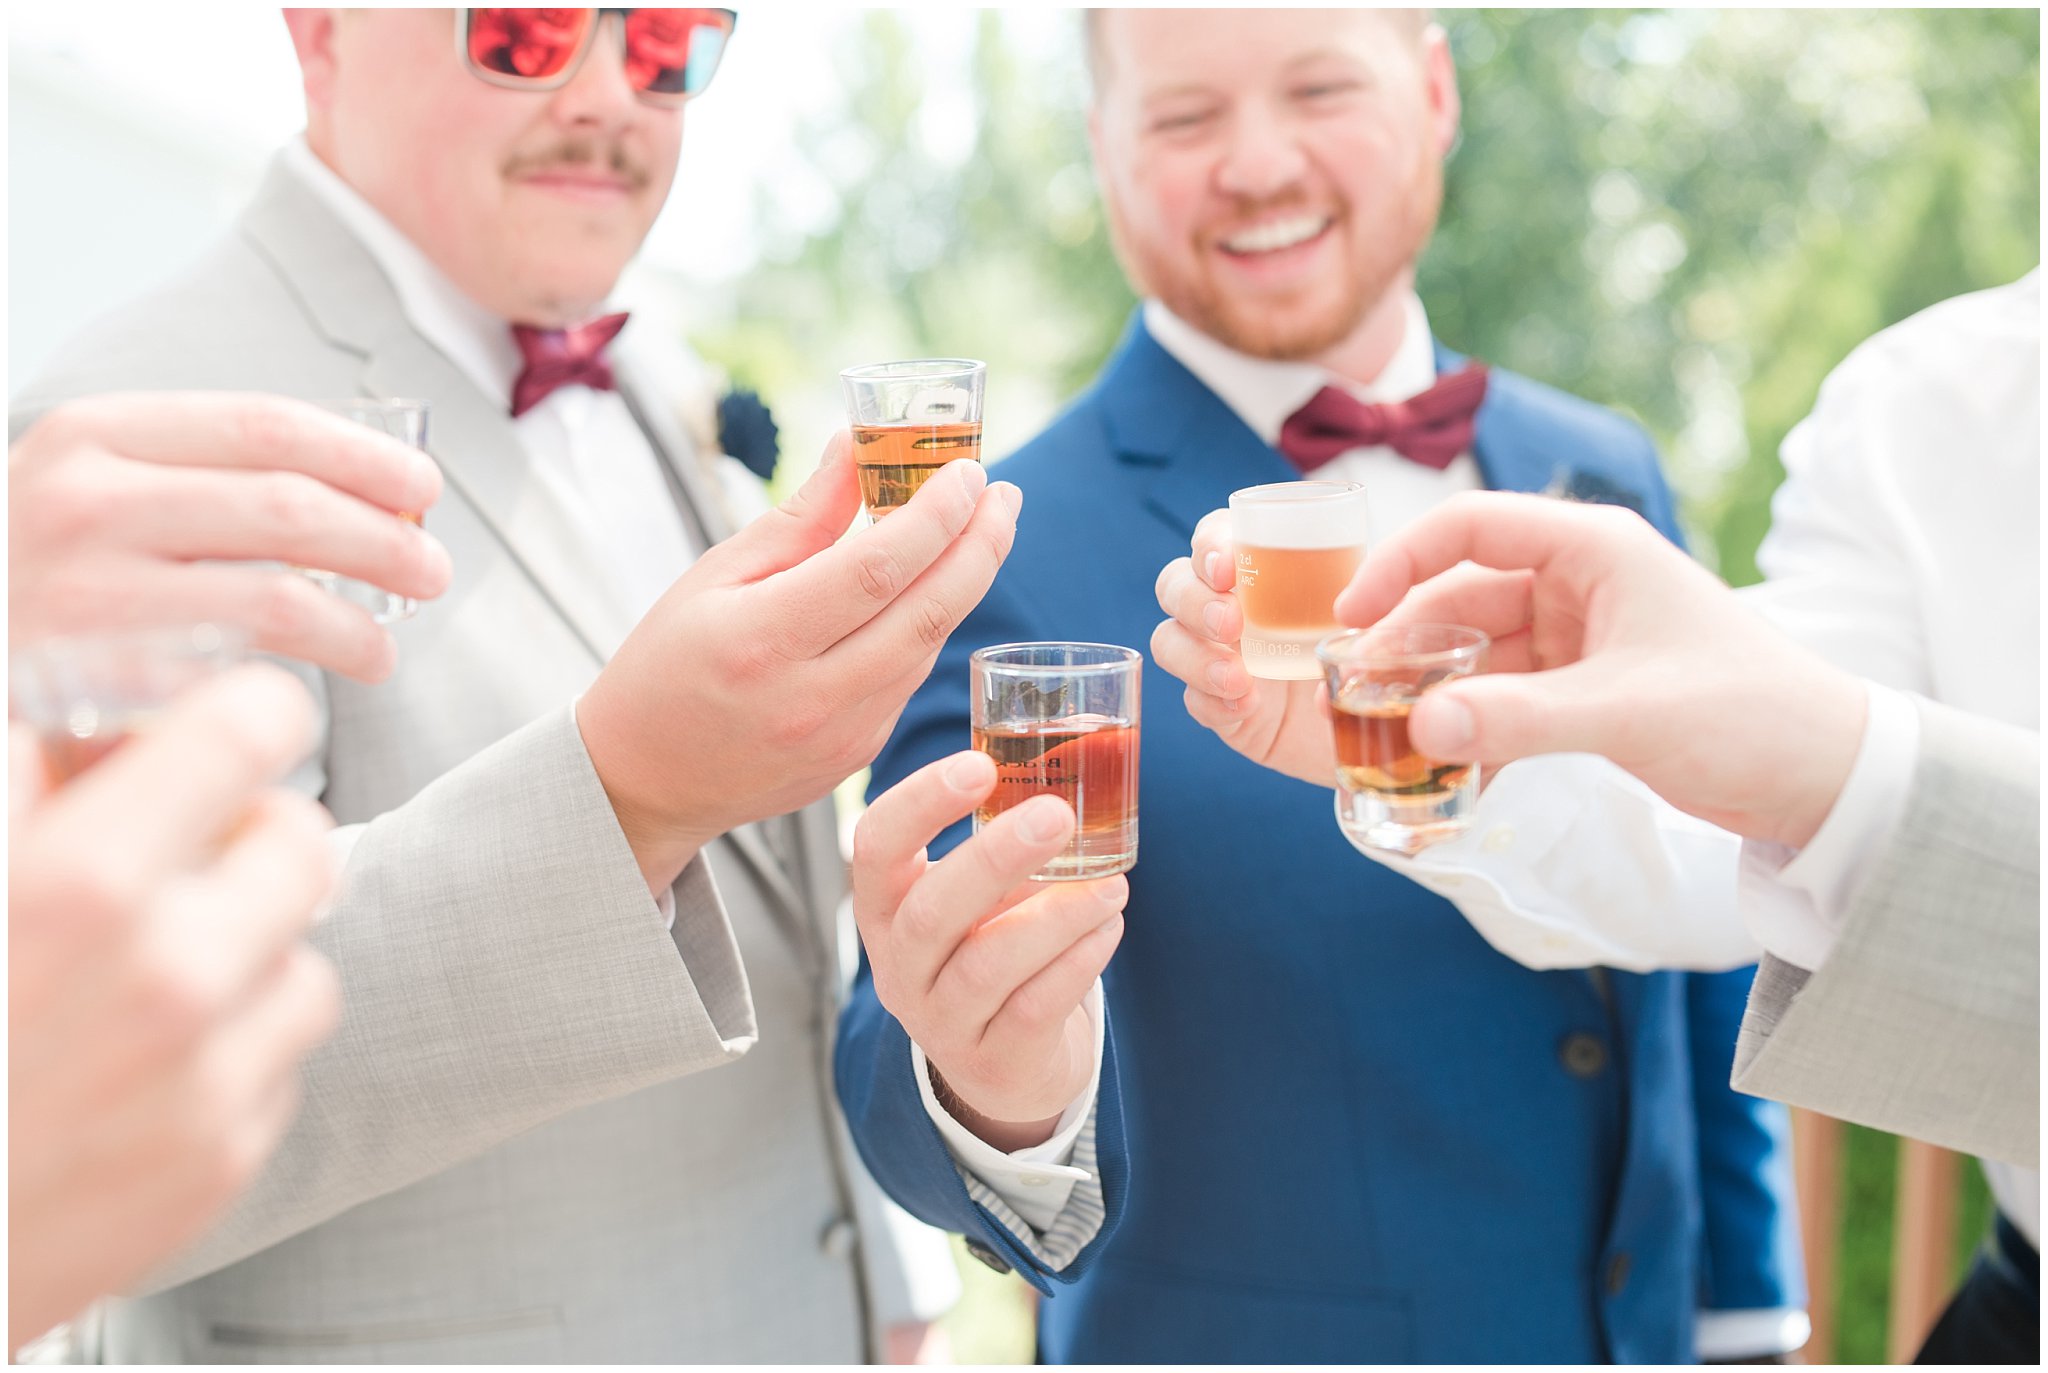 Groom and groomsmen toast before wedding ceremony | Top Utah Wedding and Couples Photos 2019 | Jessie and Dallin Photography